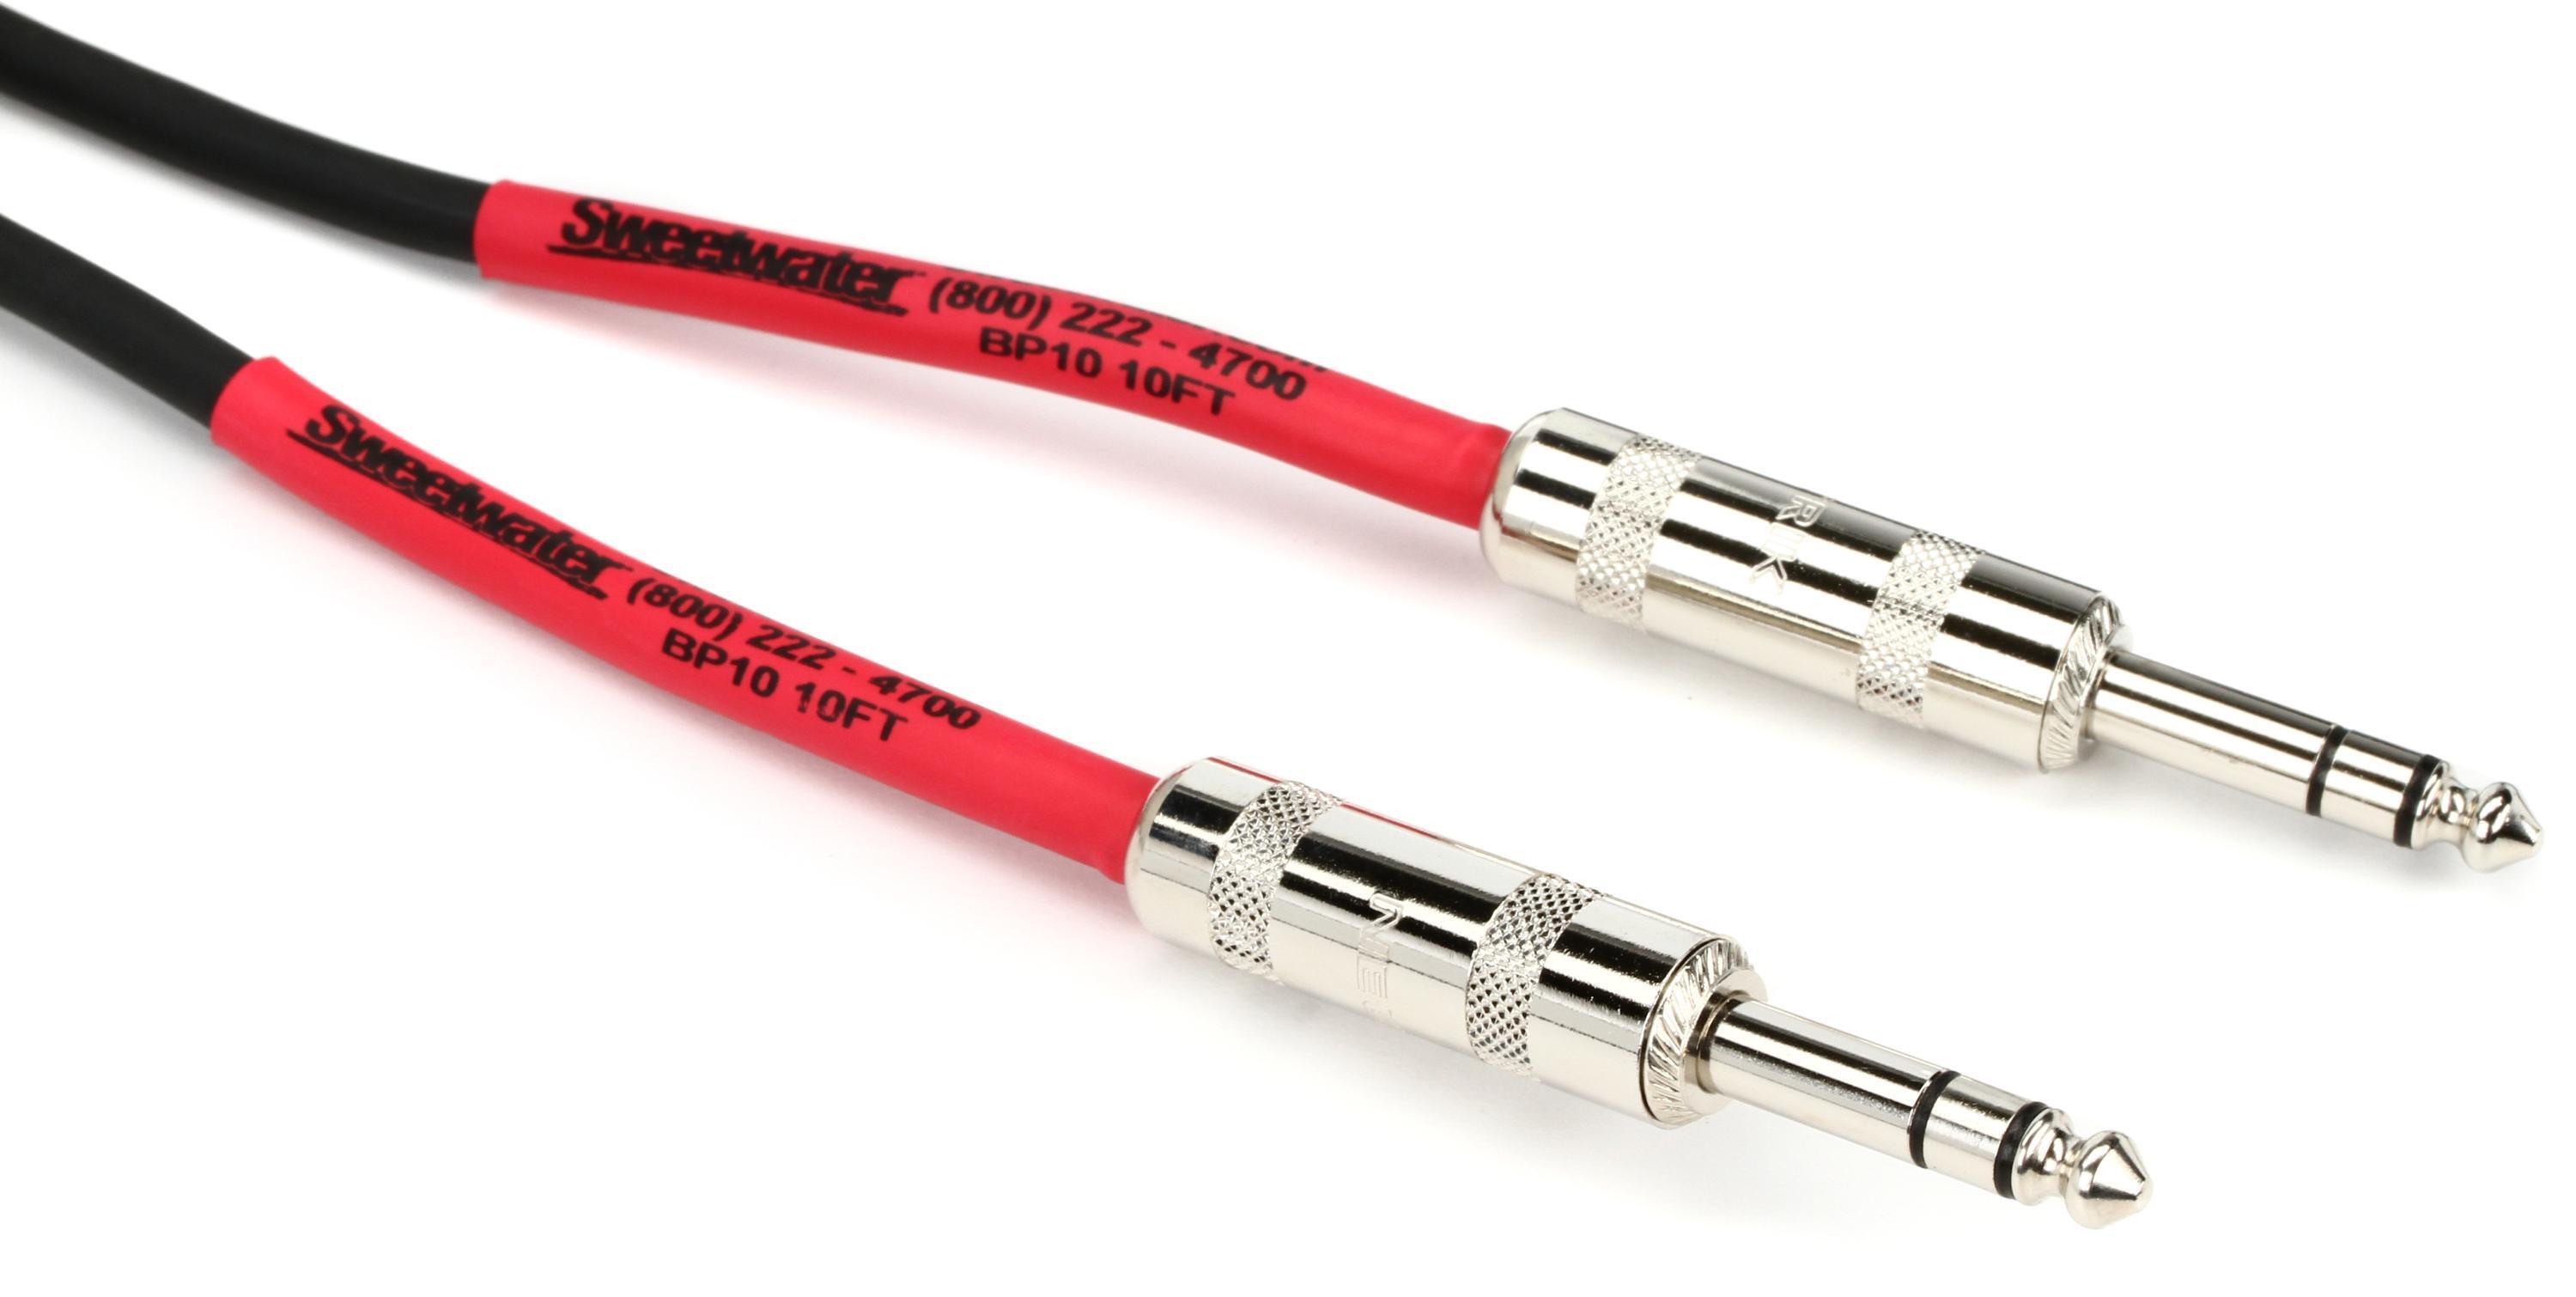 Bundled Item: Pro Co BP-10 Excellines Balanced Patch Cable - 1/4-inch TRS Male to 1/4-inch TRS Male - 10 foot